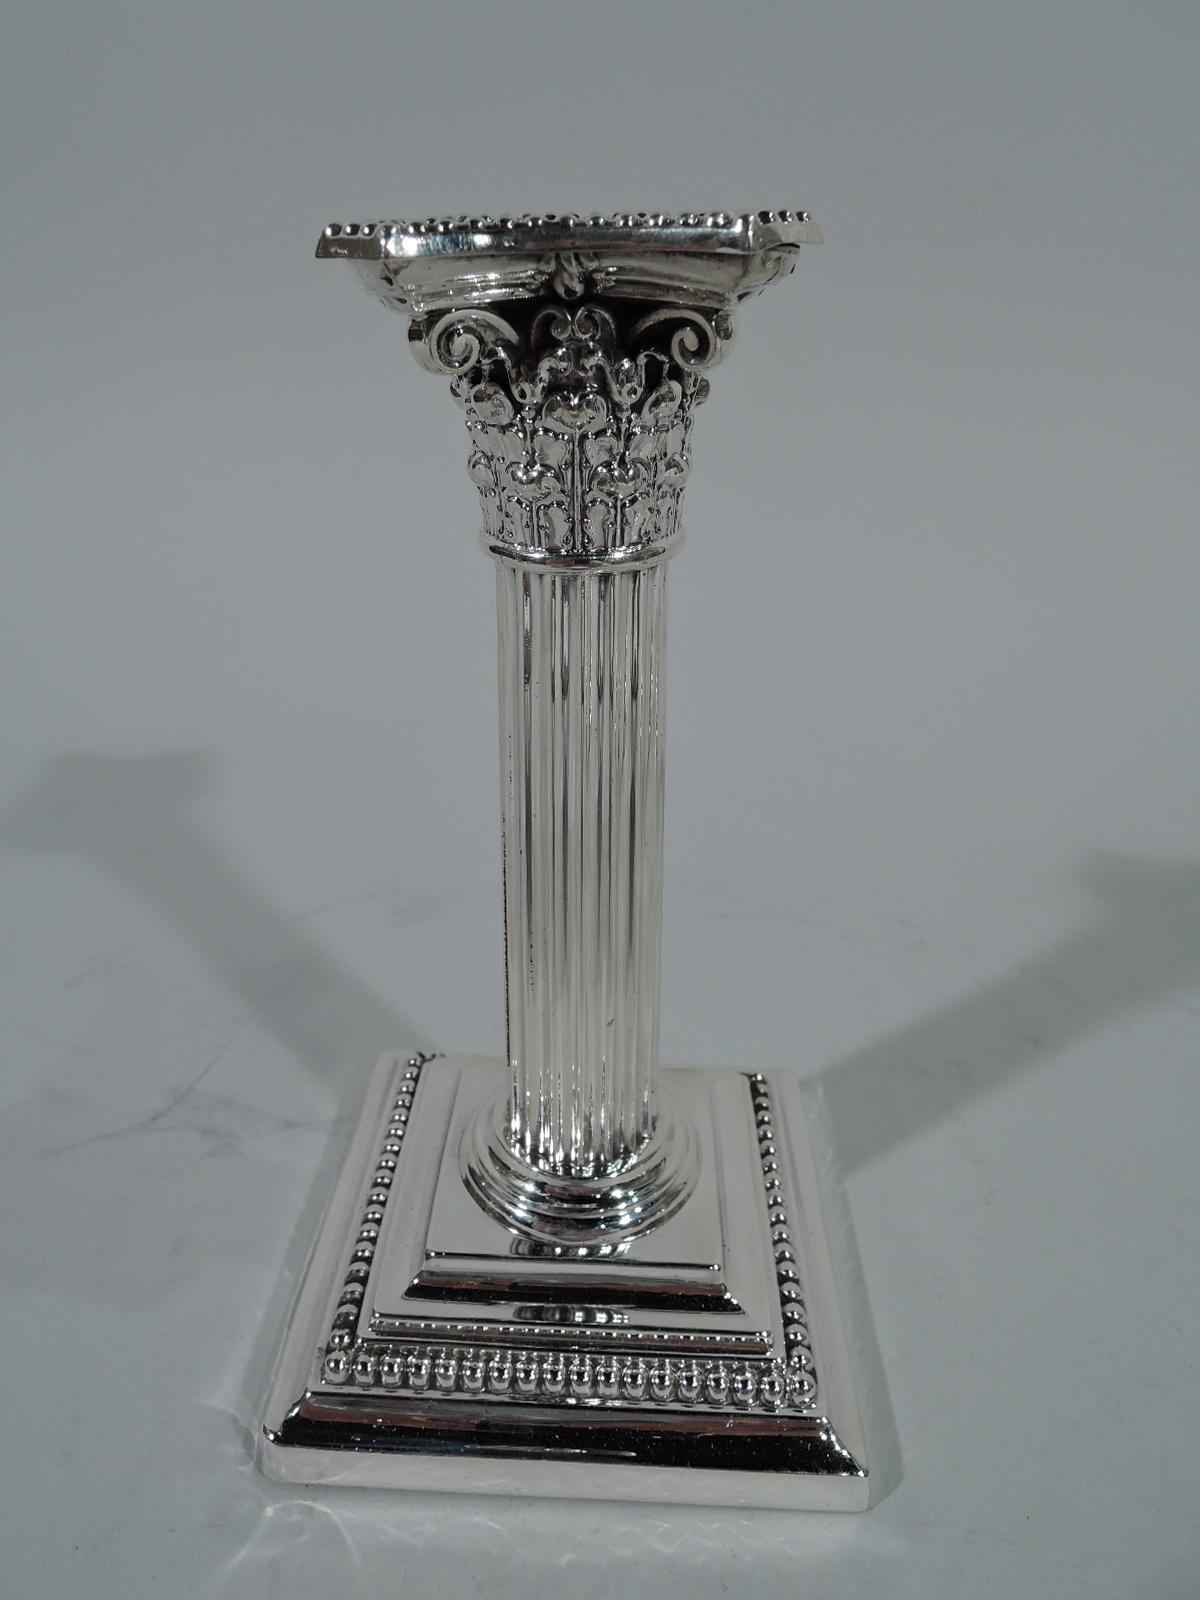 Pair of Edwardian sterling silver candlesticks. Made by Gorham in Providence. Each: Classical fluted column with composite capital and stepped square foot. Beading on detachable bobeche and foot. Hallmark includes A3204 and date symbols for 1904 and